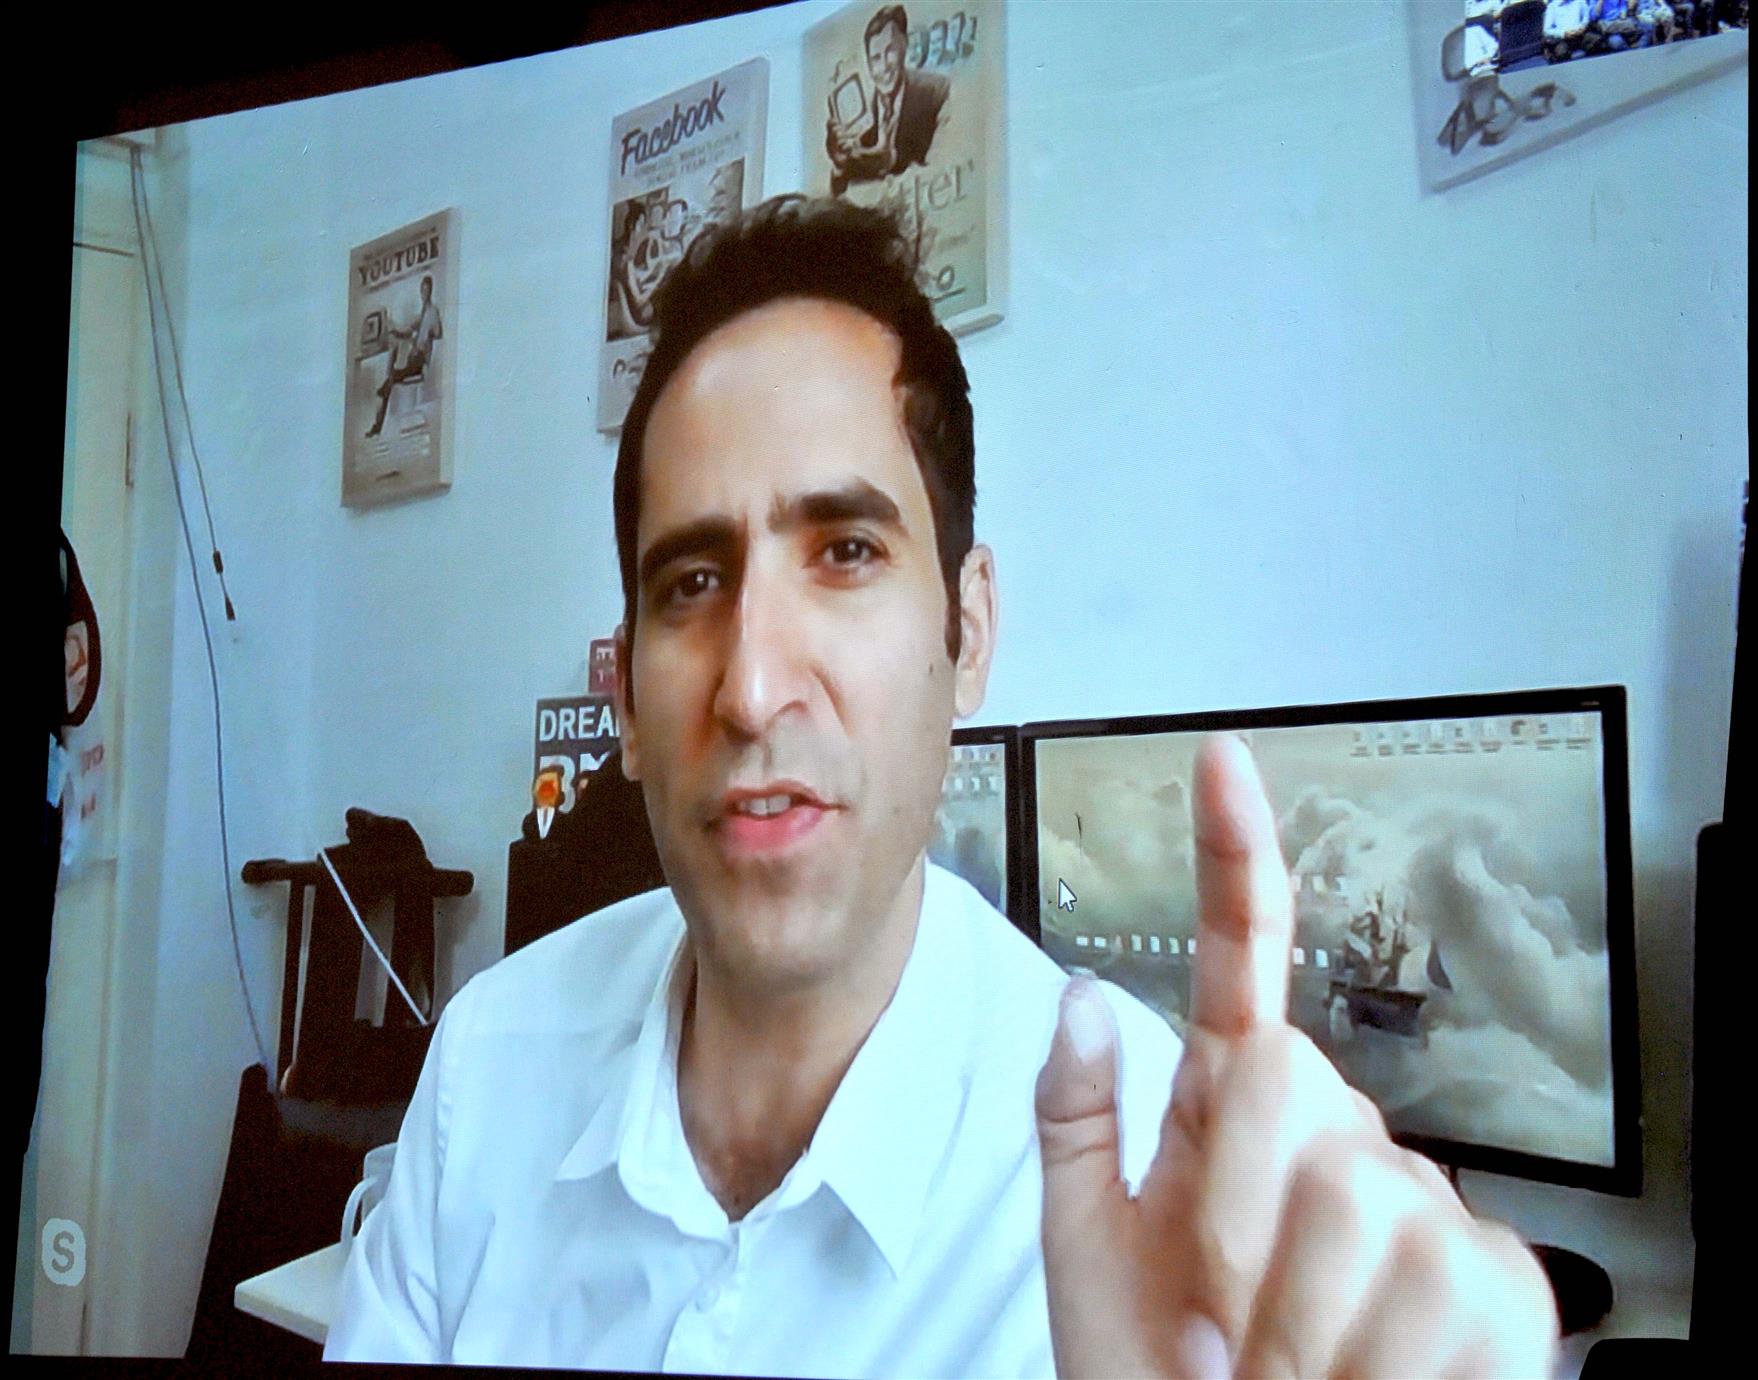 Mr. Memmy Bazilay, Internationally Acclaimed Cyber Security Expert, Israel given skype lecture from Israel on ‘Cyber Security’ to students at Nehru Science Centre, Worli, Mumbai on August 19, 2019.